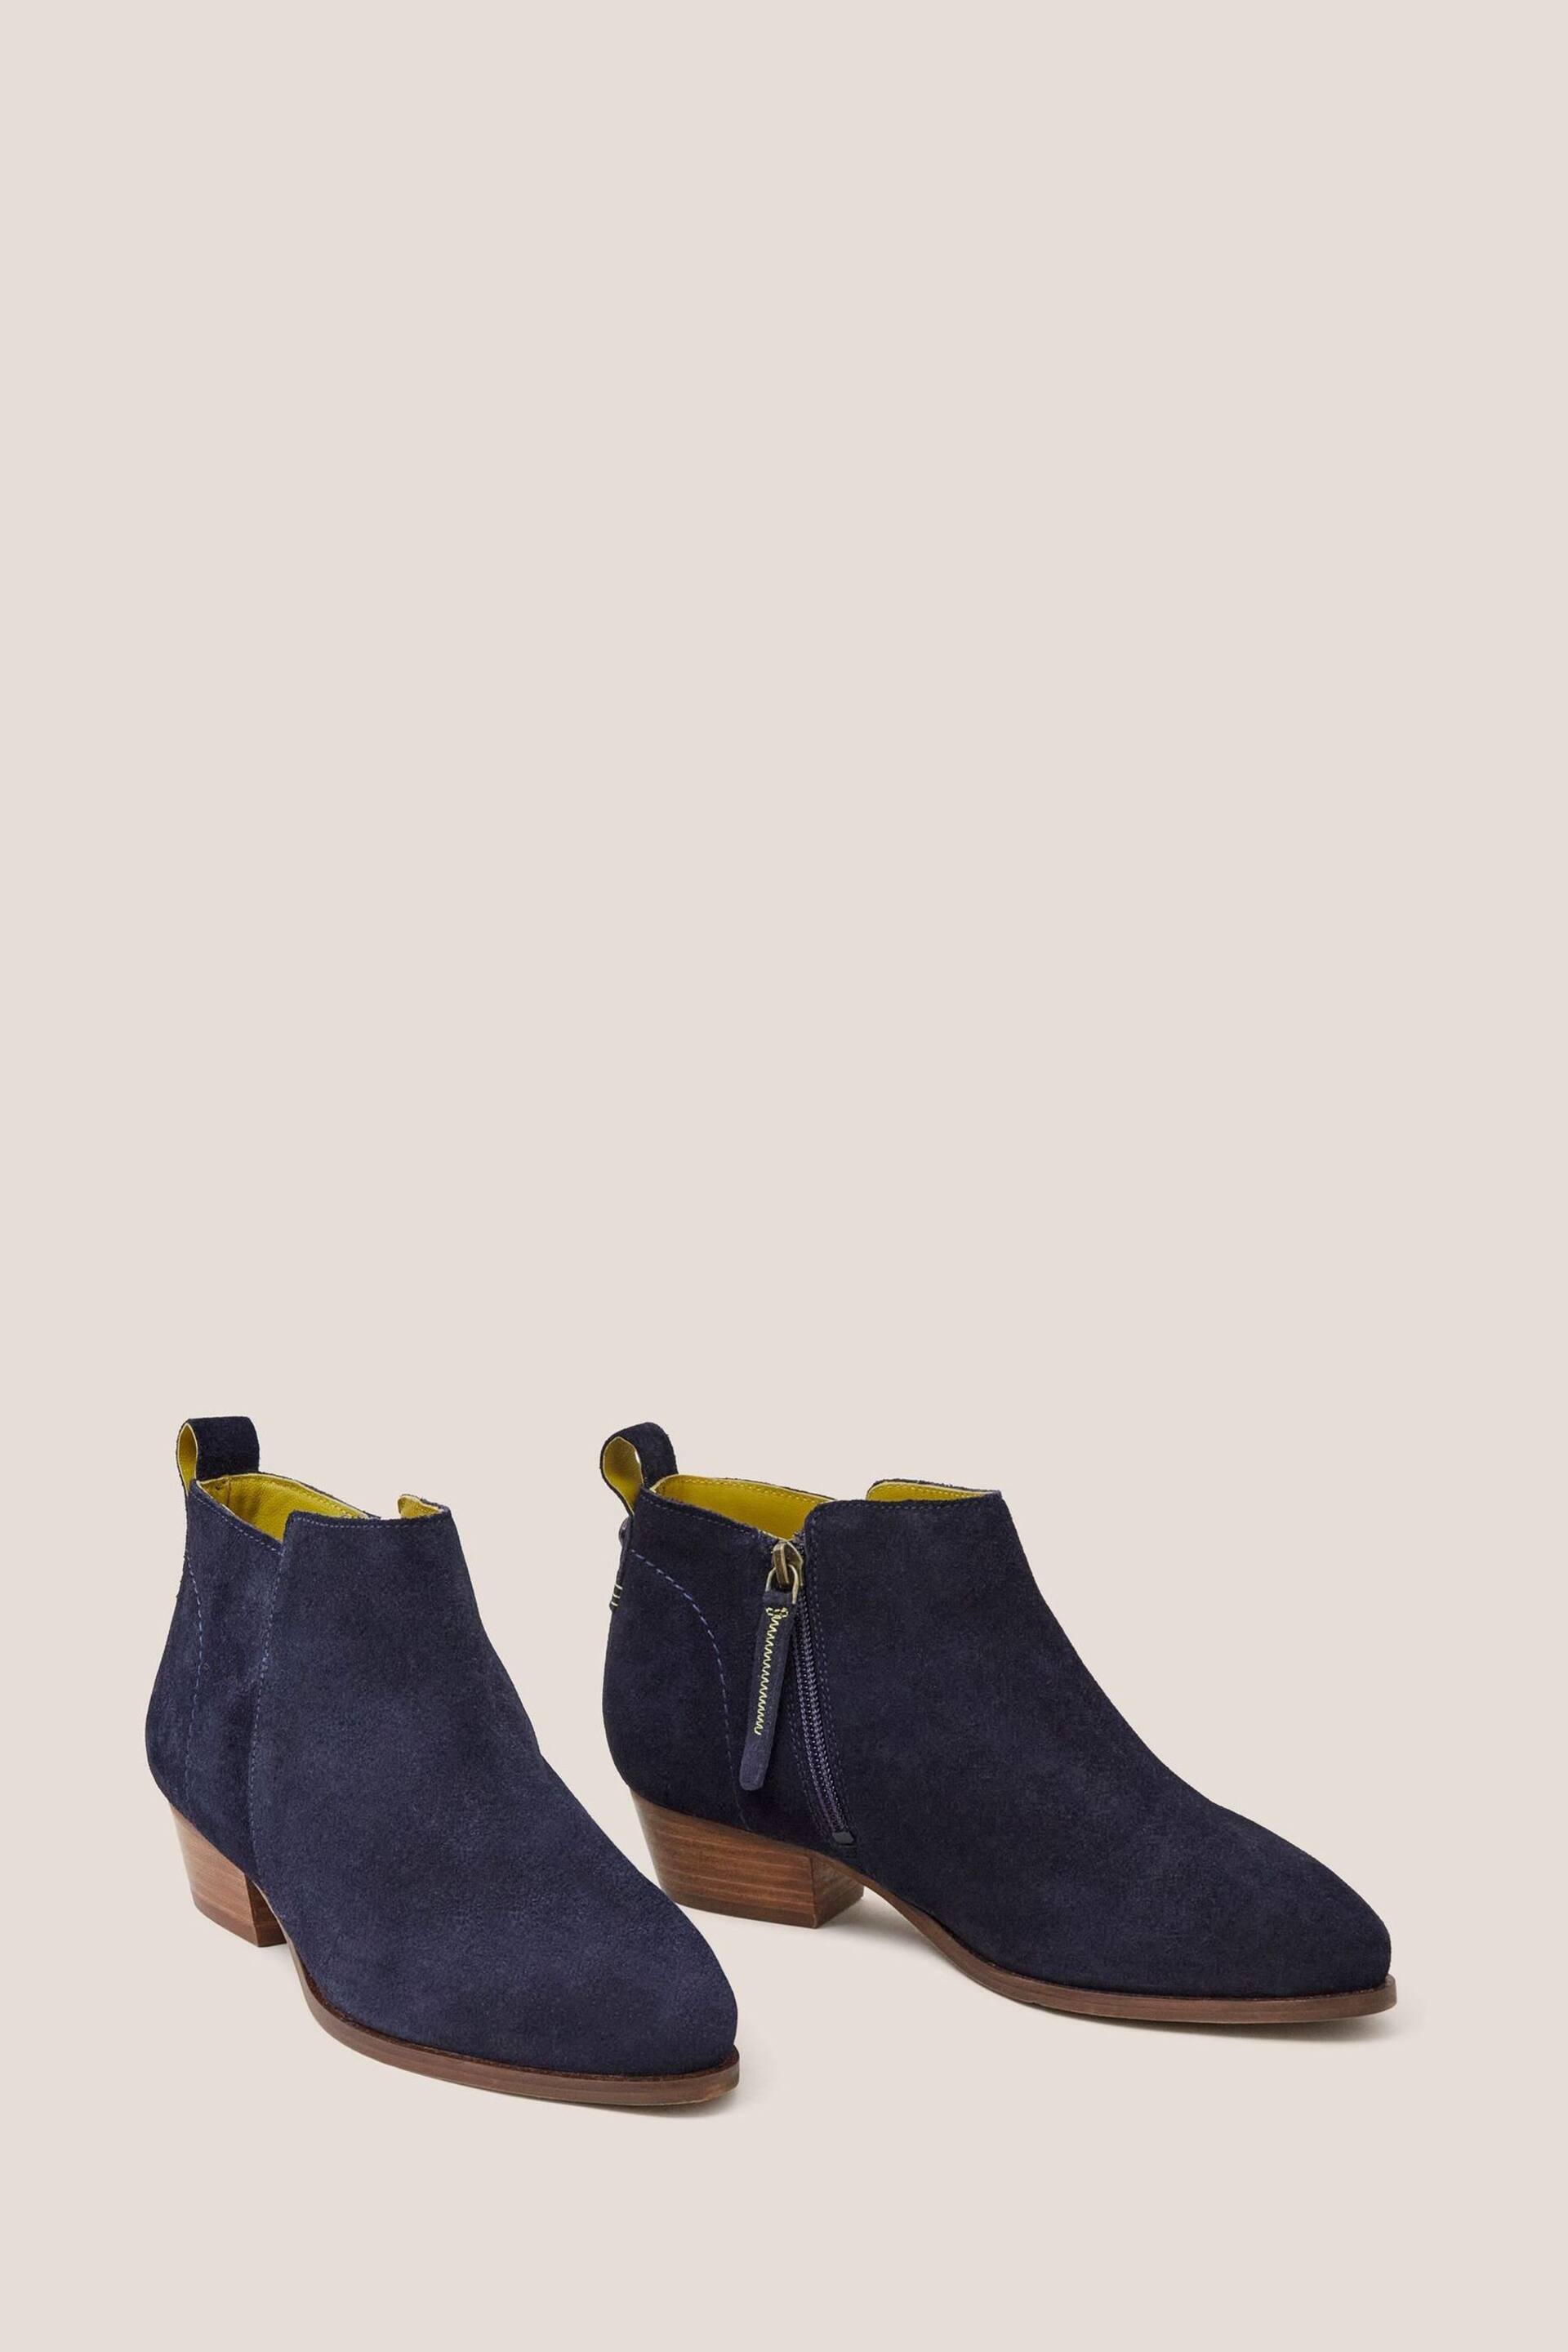 White Stuff Blue Wide Fit Suede Ankle Boots - Image 2 of 4